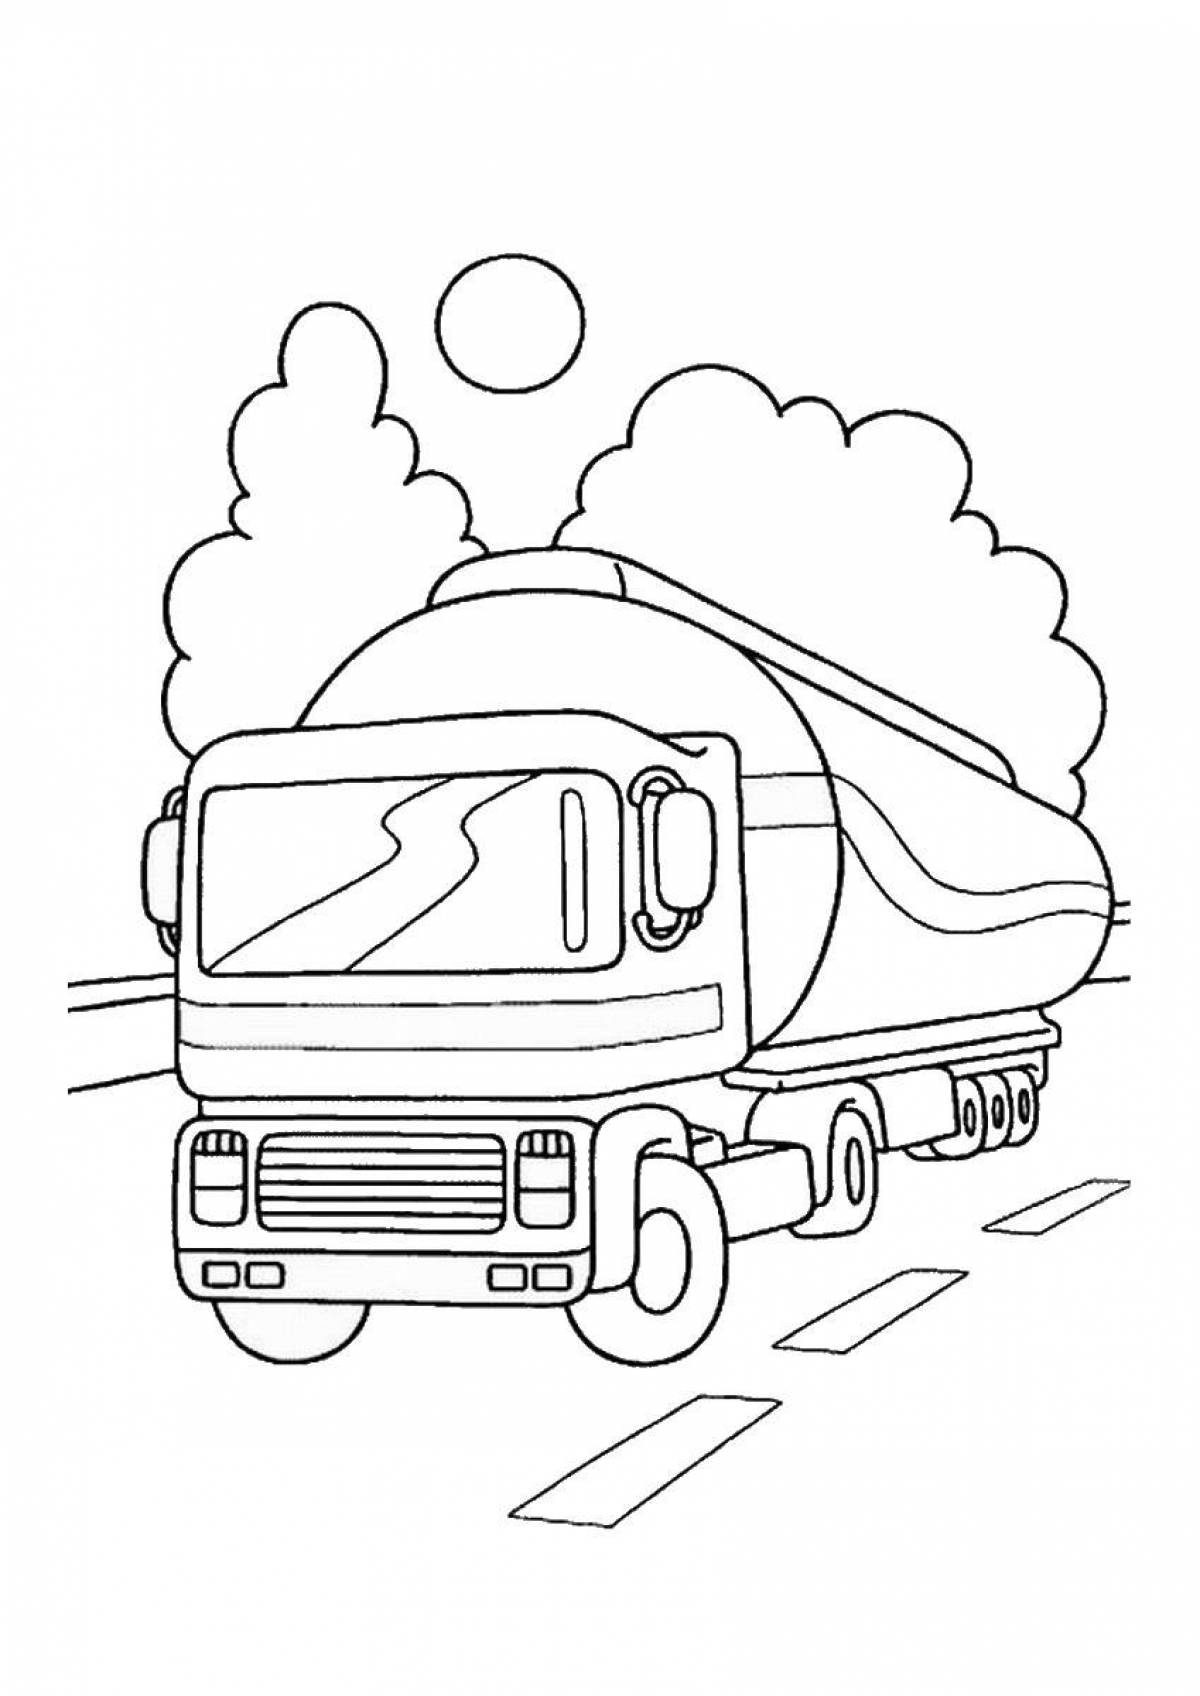 Majestic fuel truck coloring page